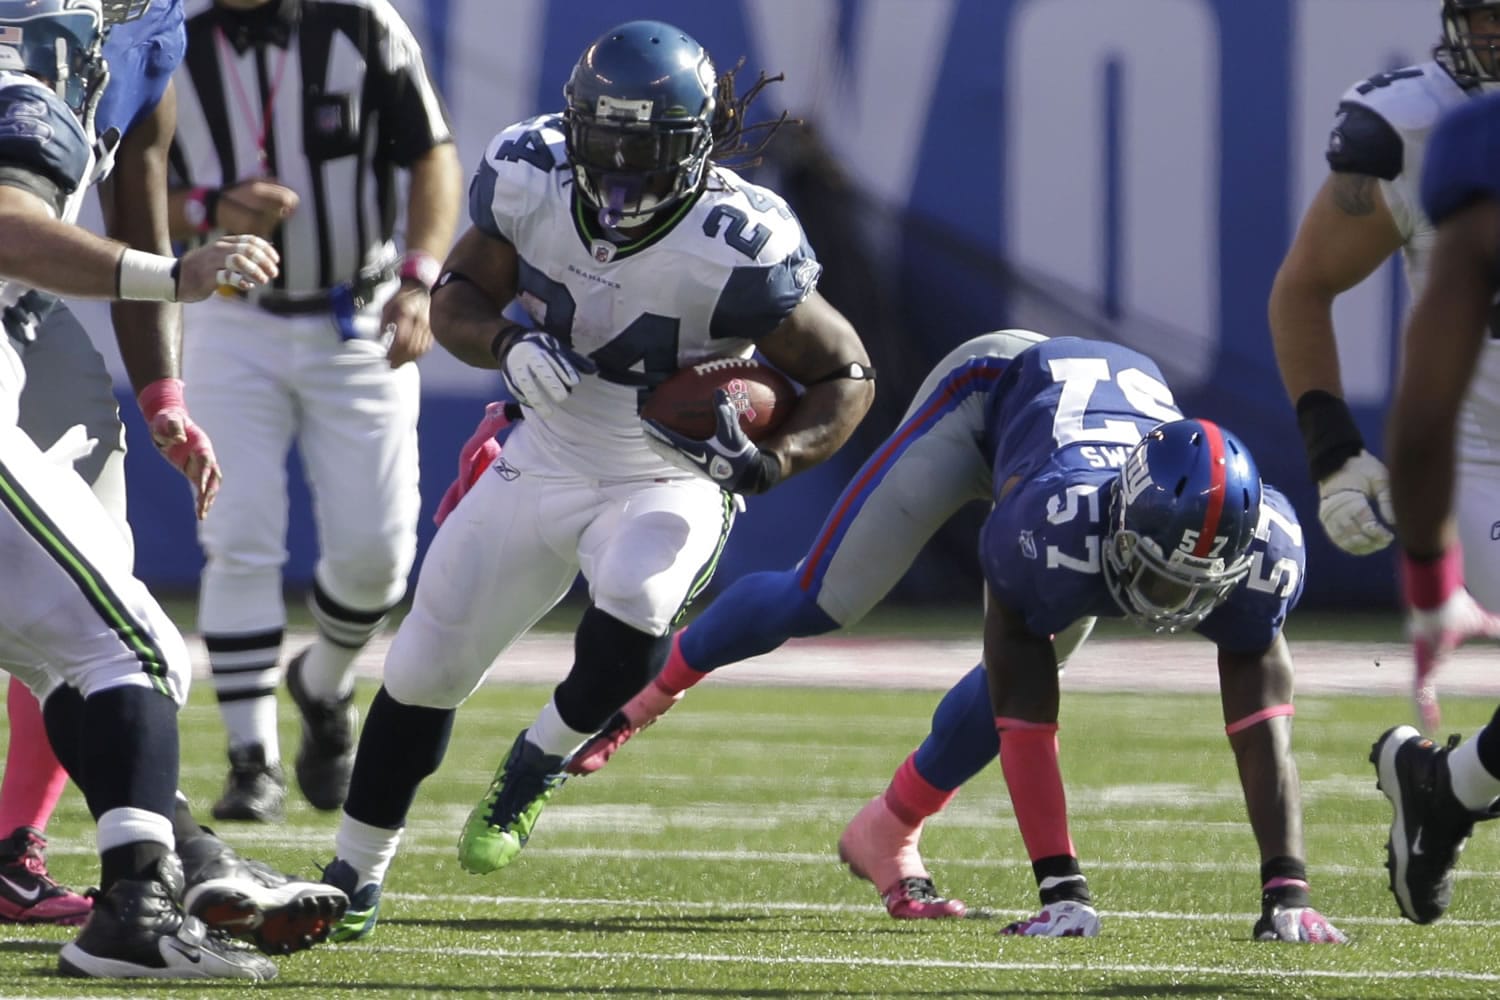 Seattle Seahawks' Marshawn Lynch (24) had 12 carries for 98 yards and a touchdown Sunday against the New York Giants.